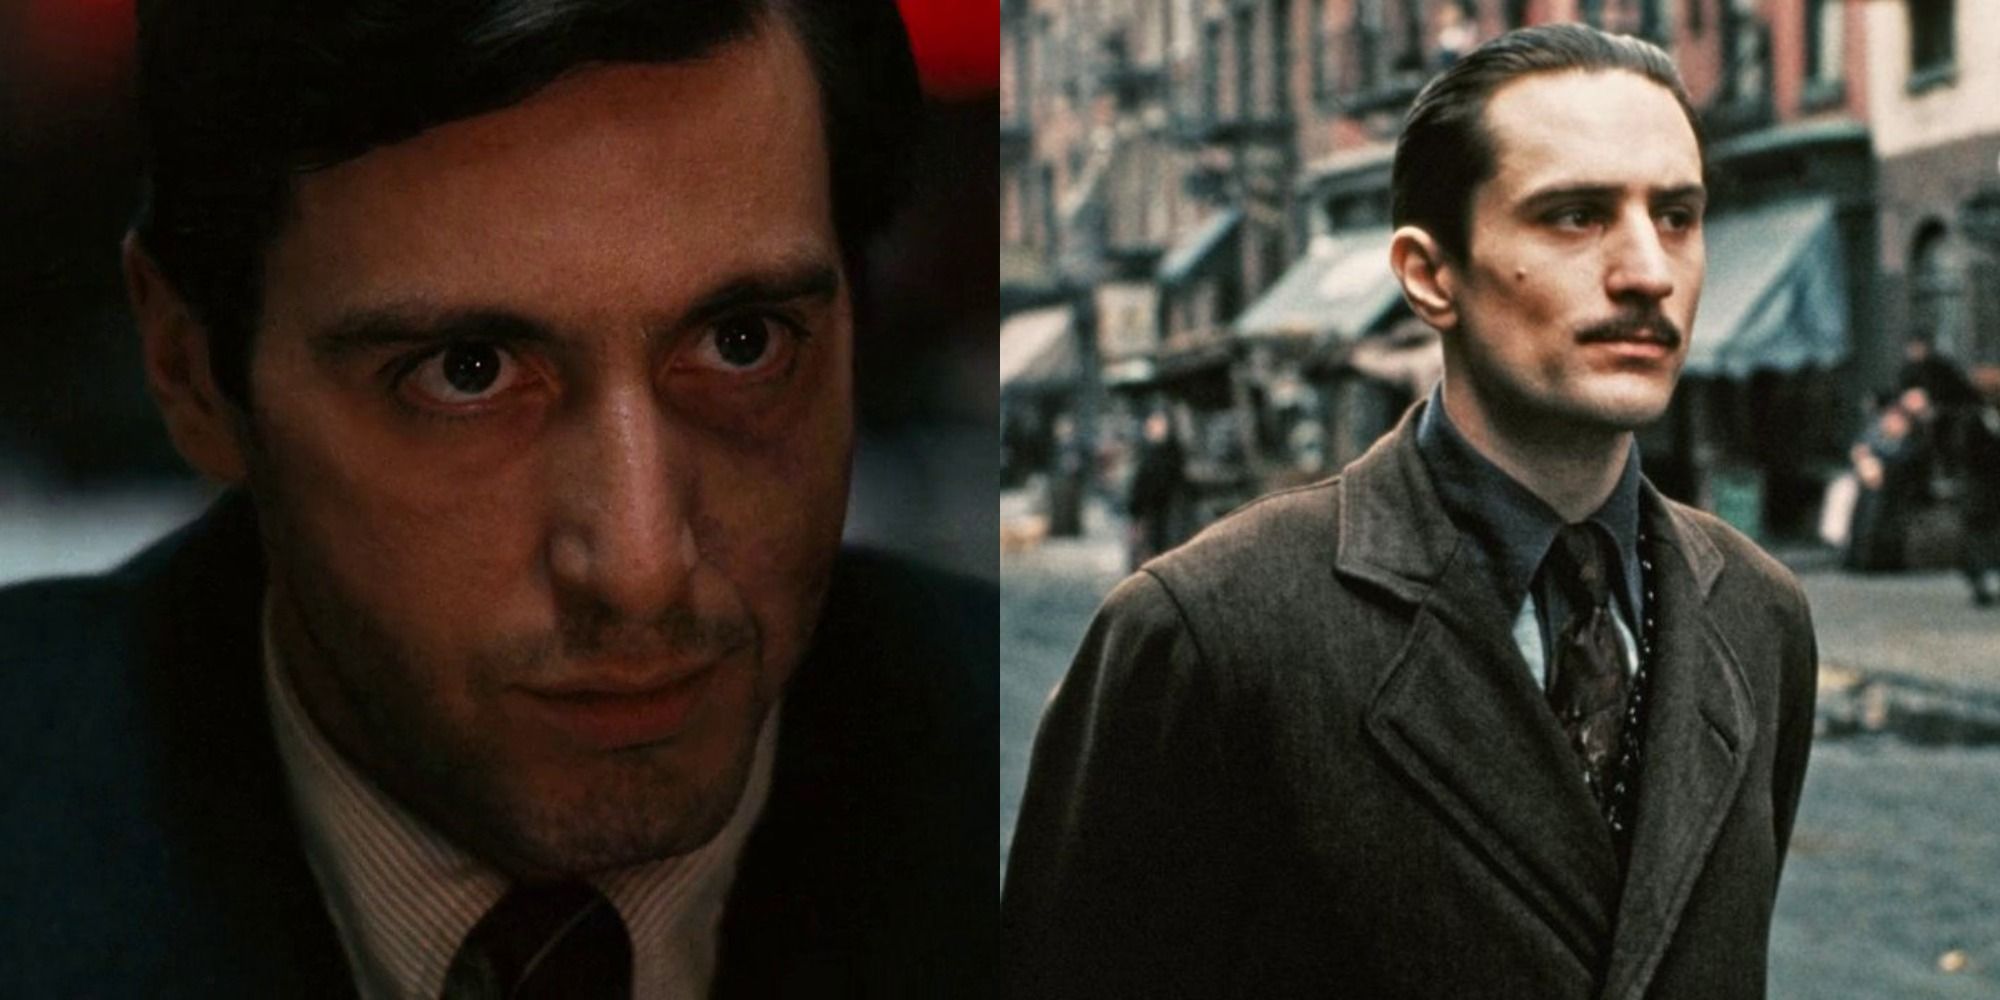 5 Things The Godfather Part II Does Better Than The Original (& 5 Ways The First Movie Is Better)